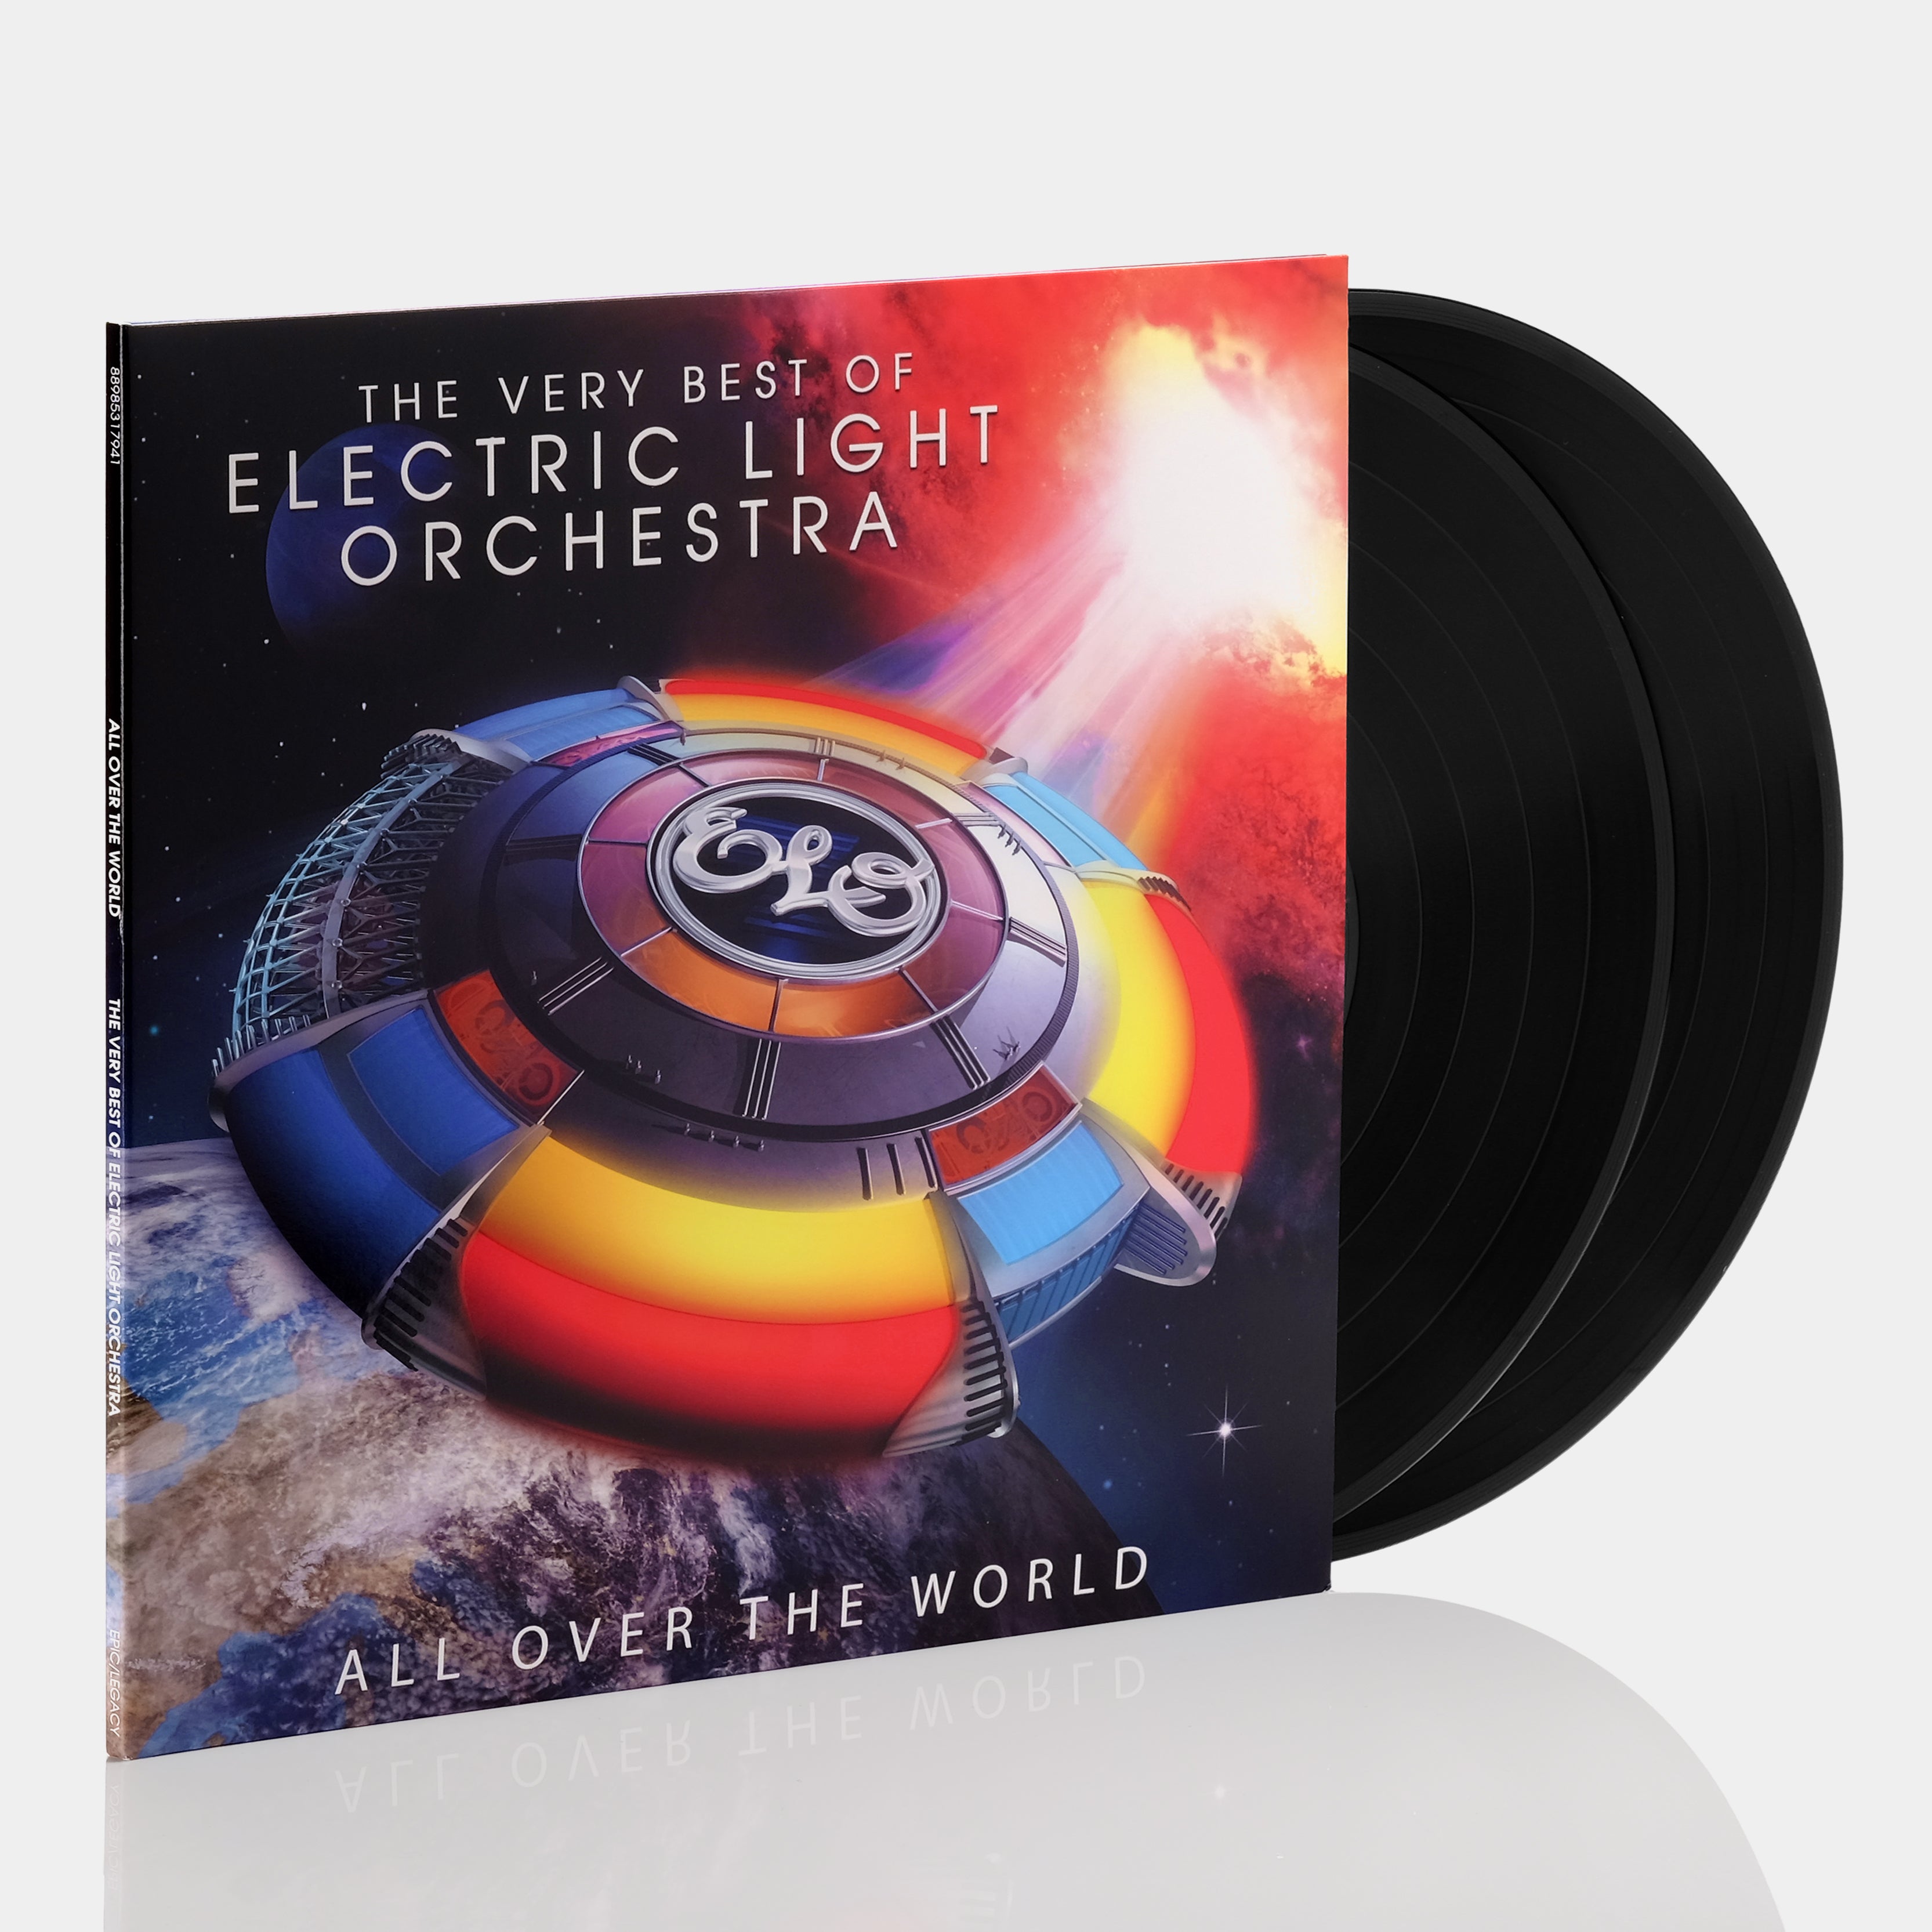 Electric Light Orchestra - All Over the World: The Very Best of Electric Light Orchestra 2xLP Vinyl Record